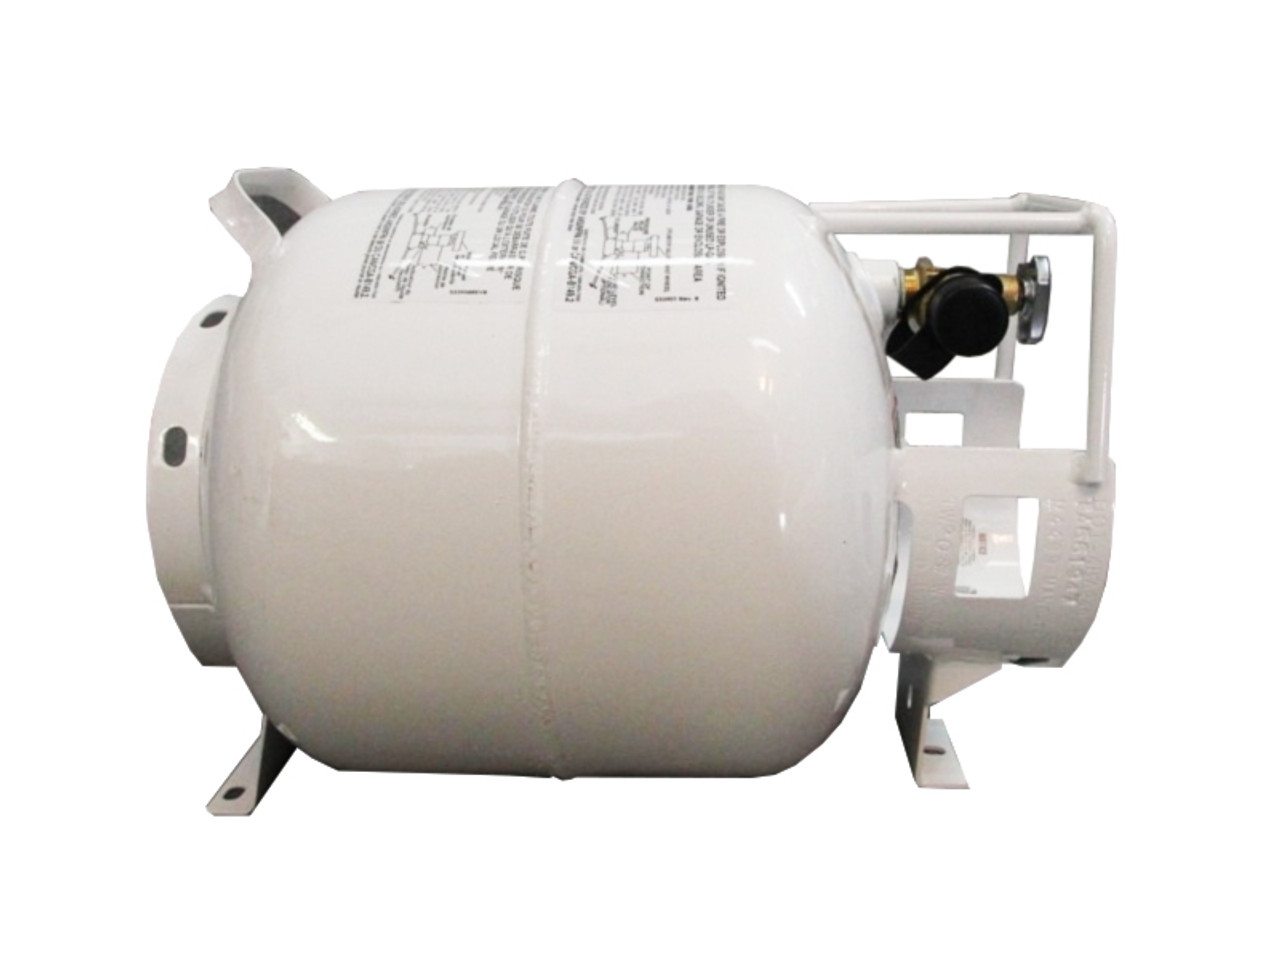 33.5 lbs (7 gallon) Manchester Aluminum Mower Propane Tank (usually arrives  within 1 week)